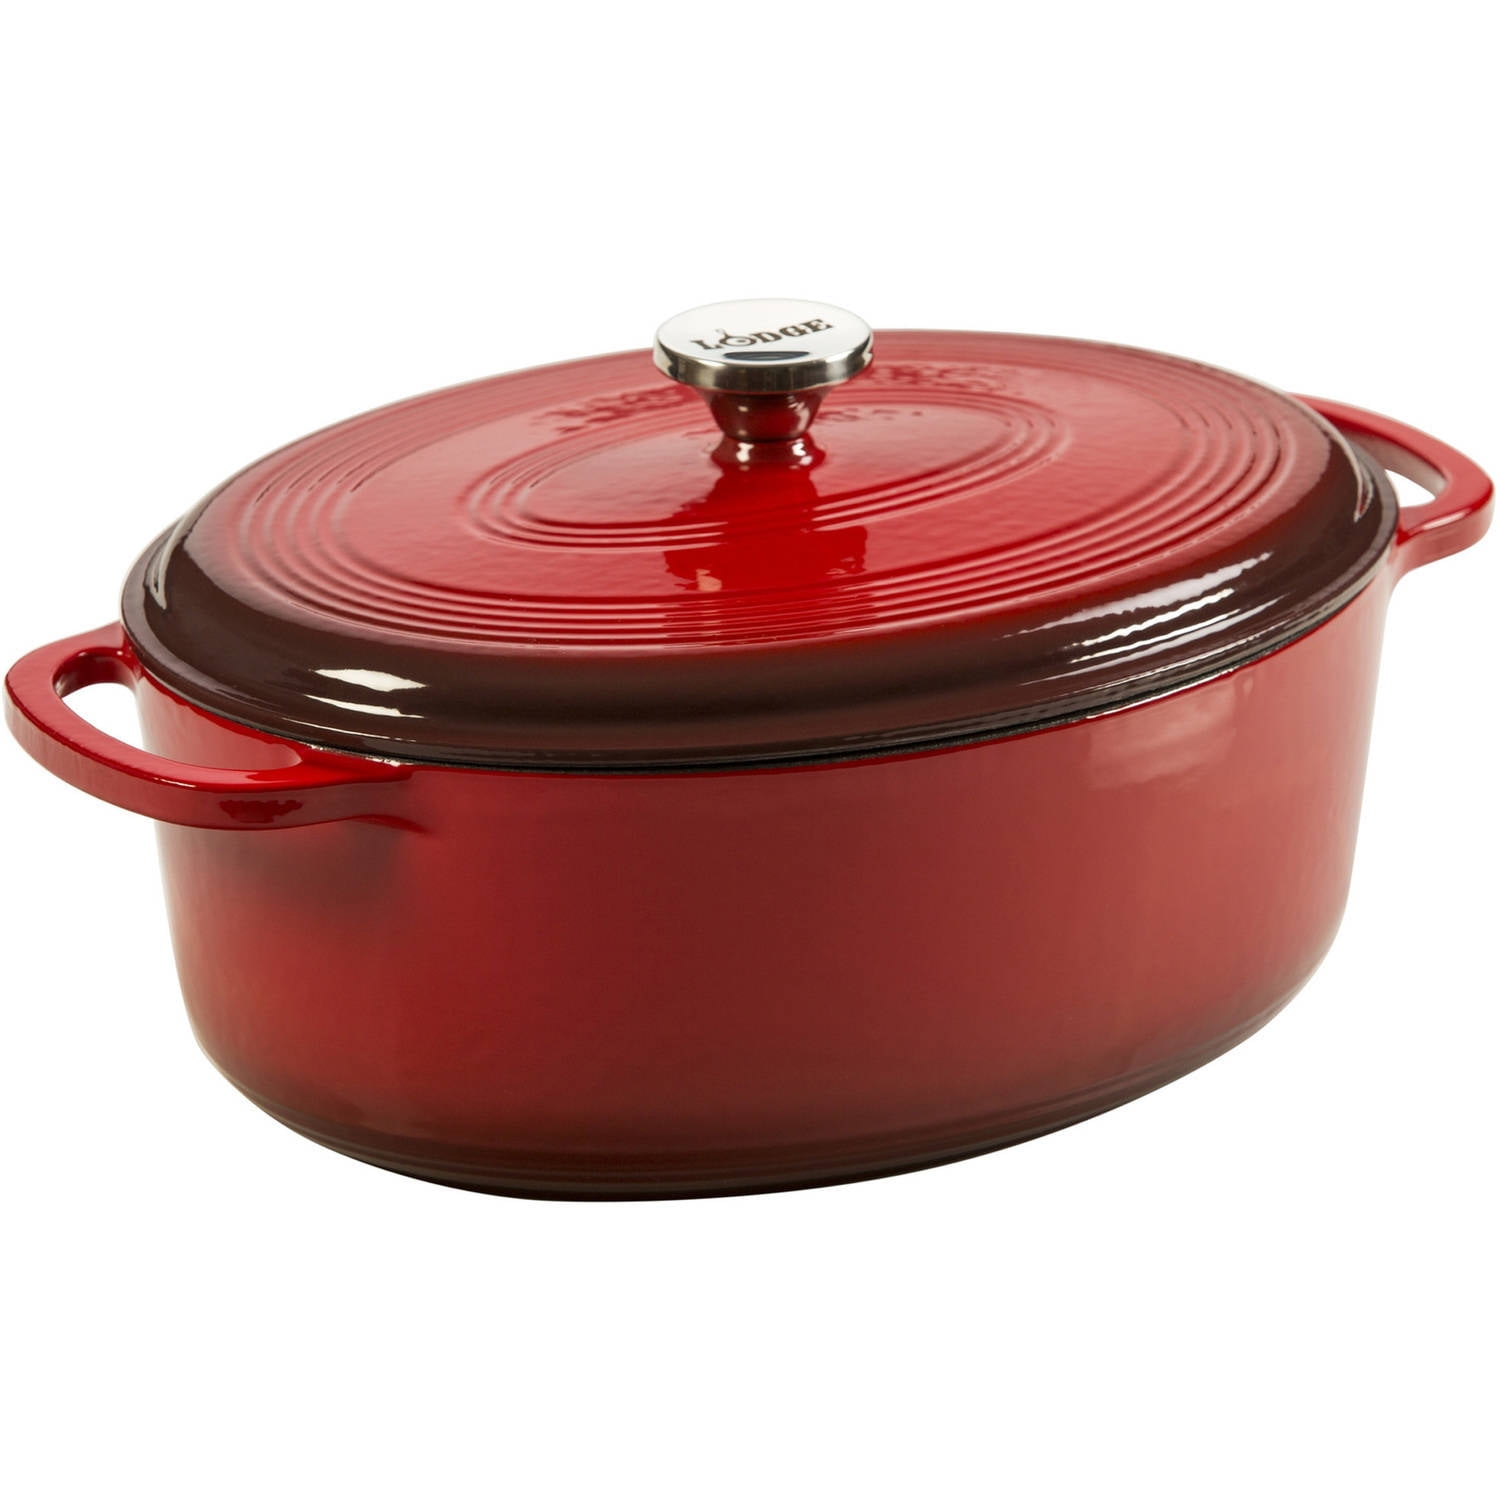 Le Creuset Cast Iron Oval Dutch Oven Red 6 3/4 qt In Great Used Condition!